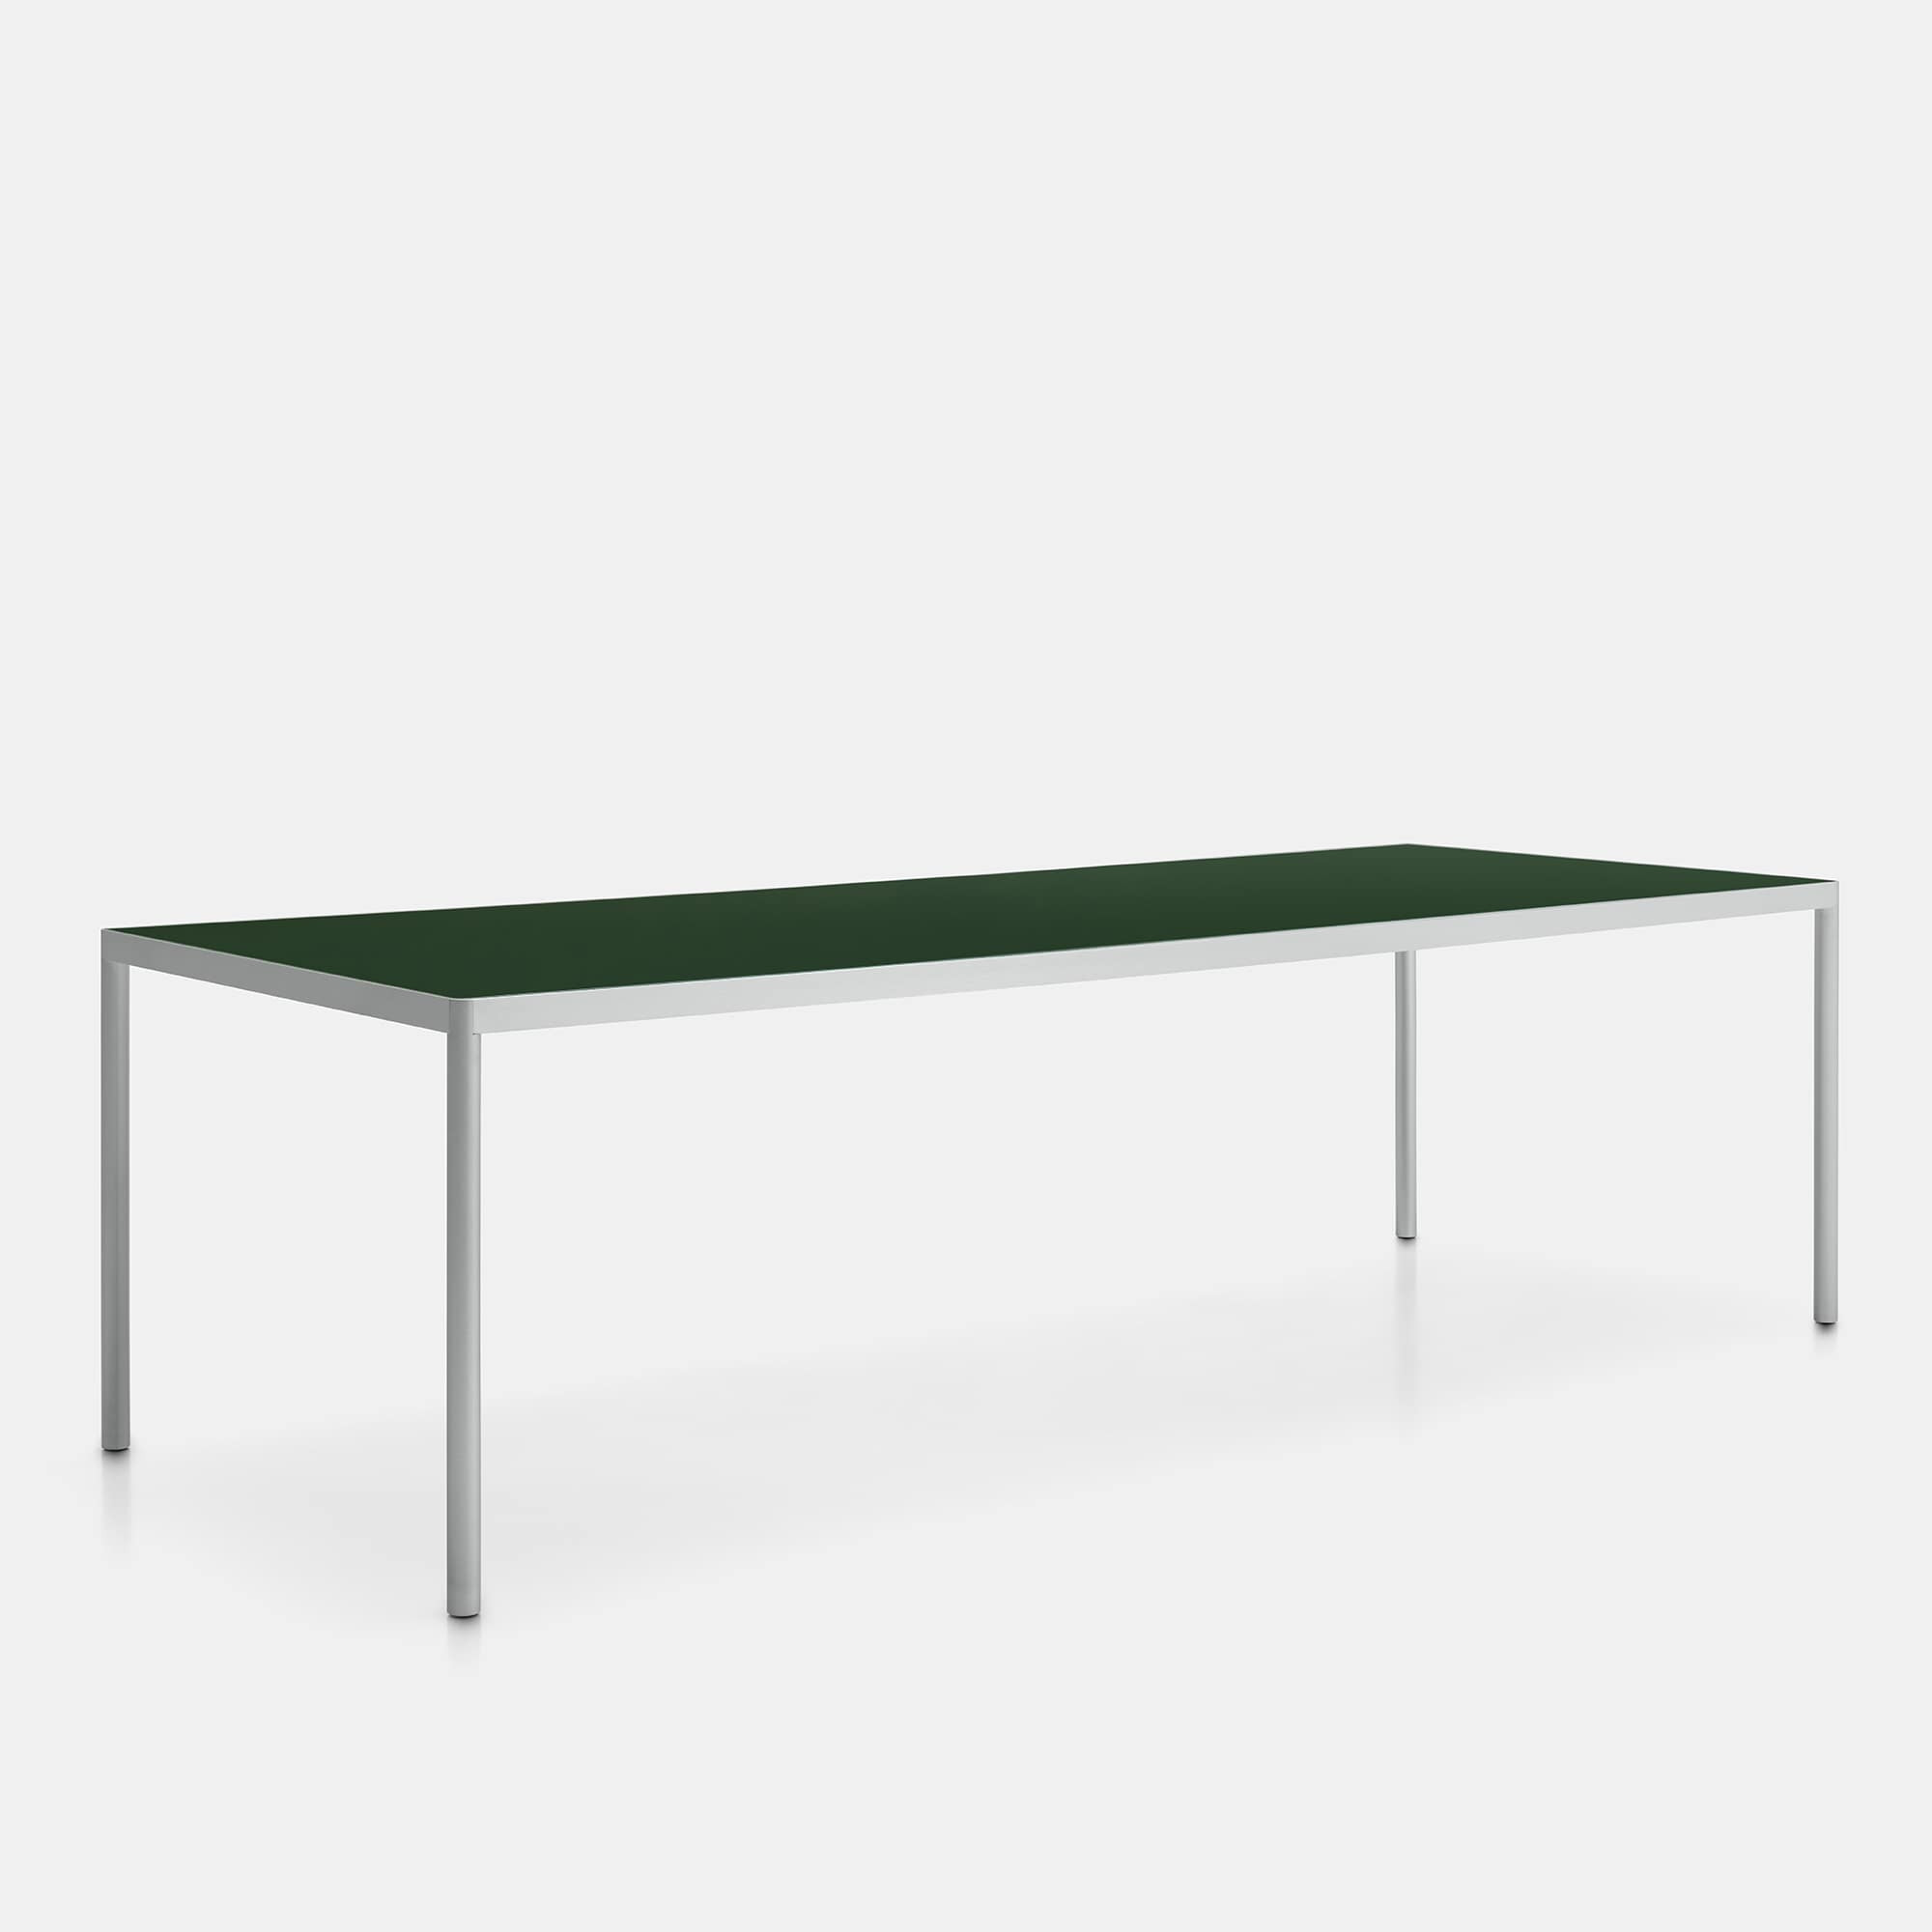 Offset Indoor / Outdoor Table ☞ Use: Indoor ☞ Structure: Brushed Anodised Aluminium X137 ☞ Top: Reconstructed Stone Sage Green X161